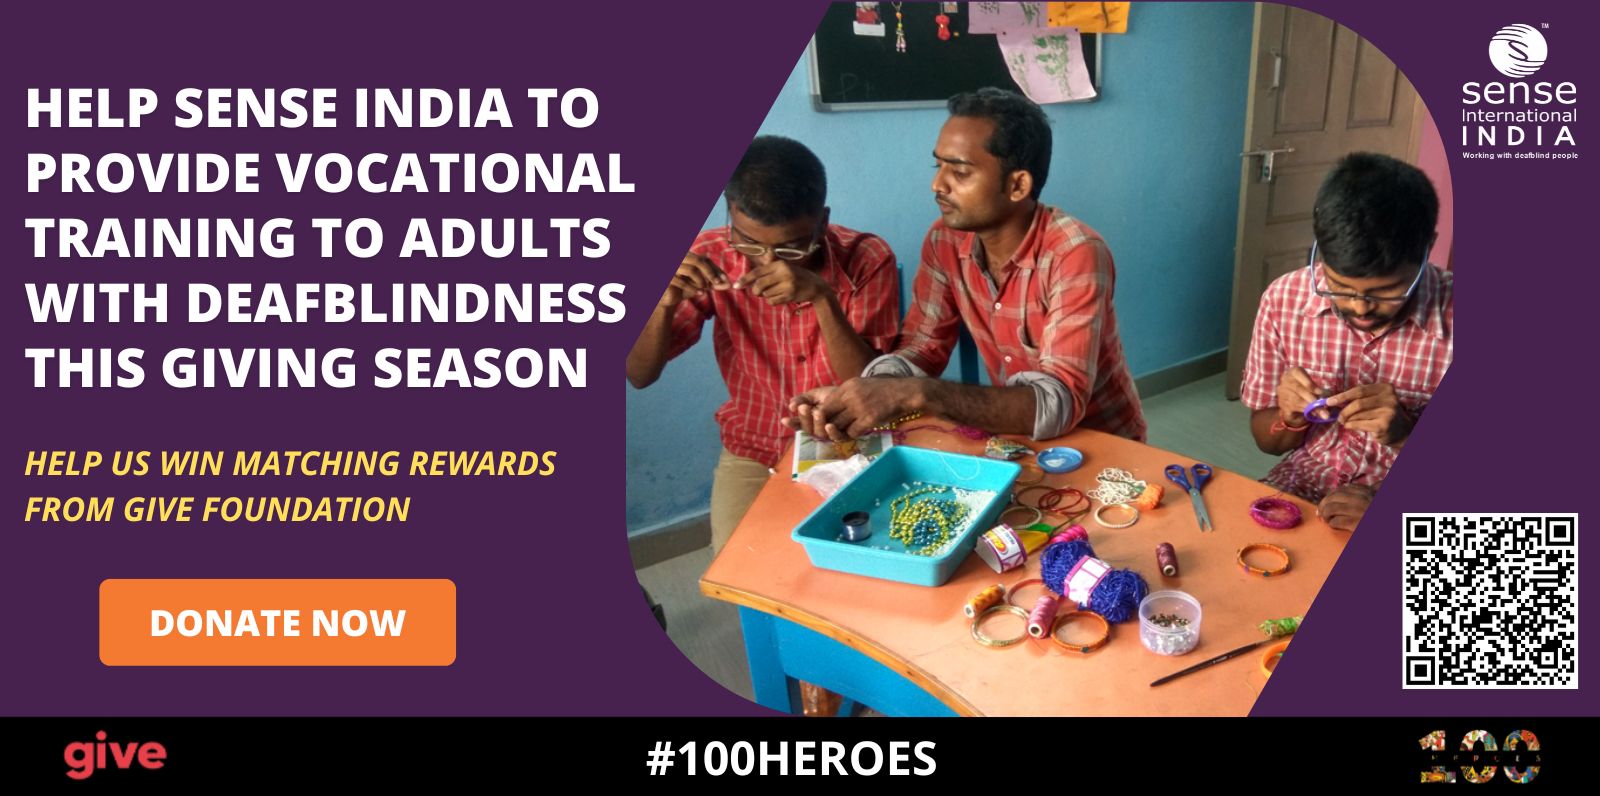 Sense India participating in 100 Heroes Campaign by Give Foundation